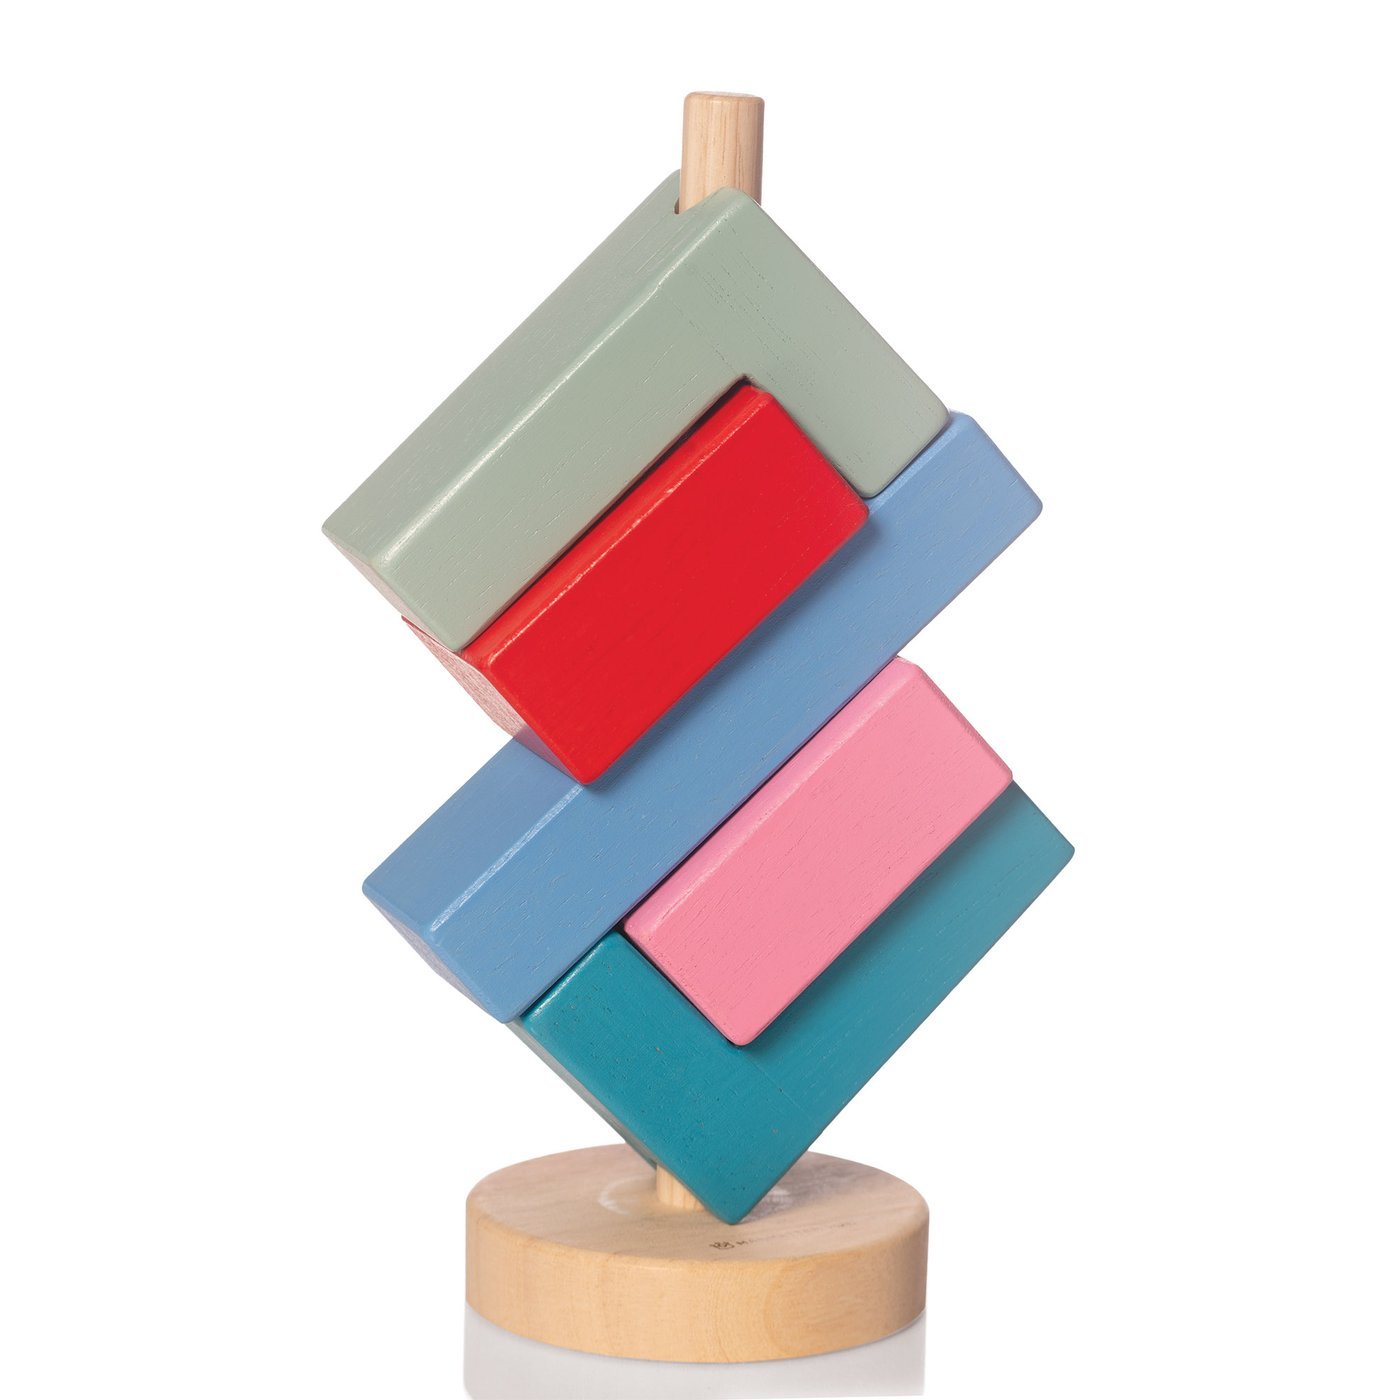 Bam Stack-a-Lacka Stacker by Manhattan Toy - Wood Wood Toys Canada's Favourite Montessori Toy Store